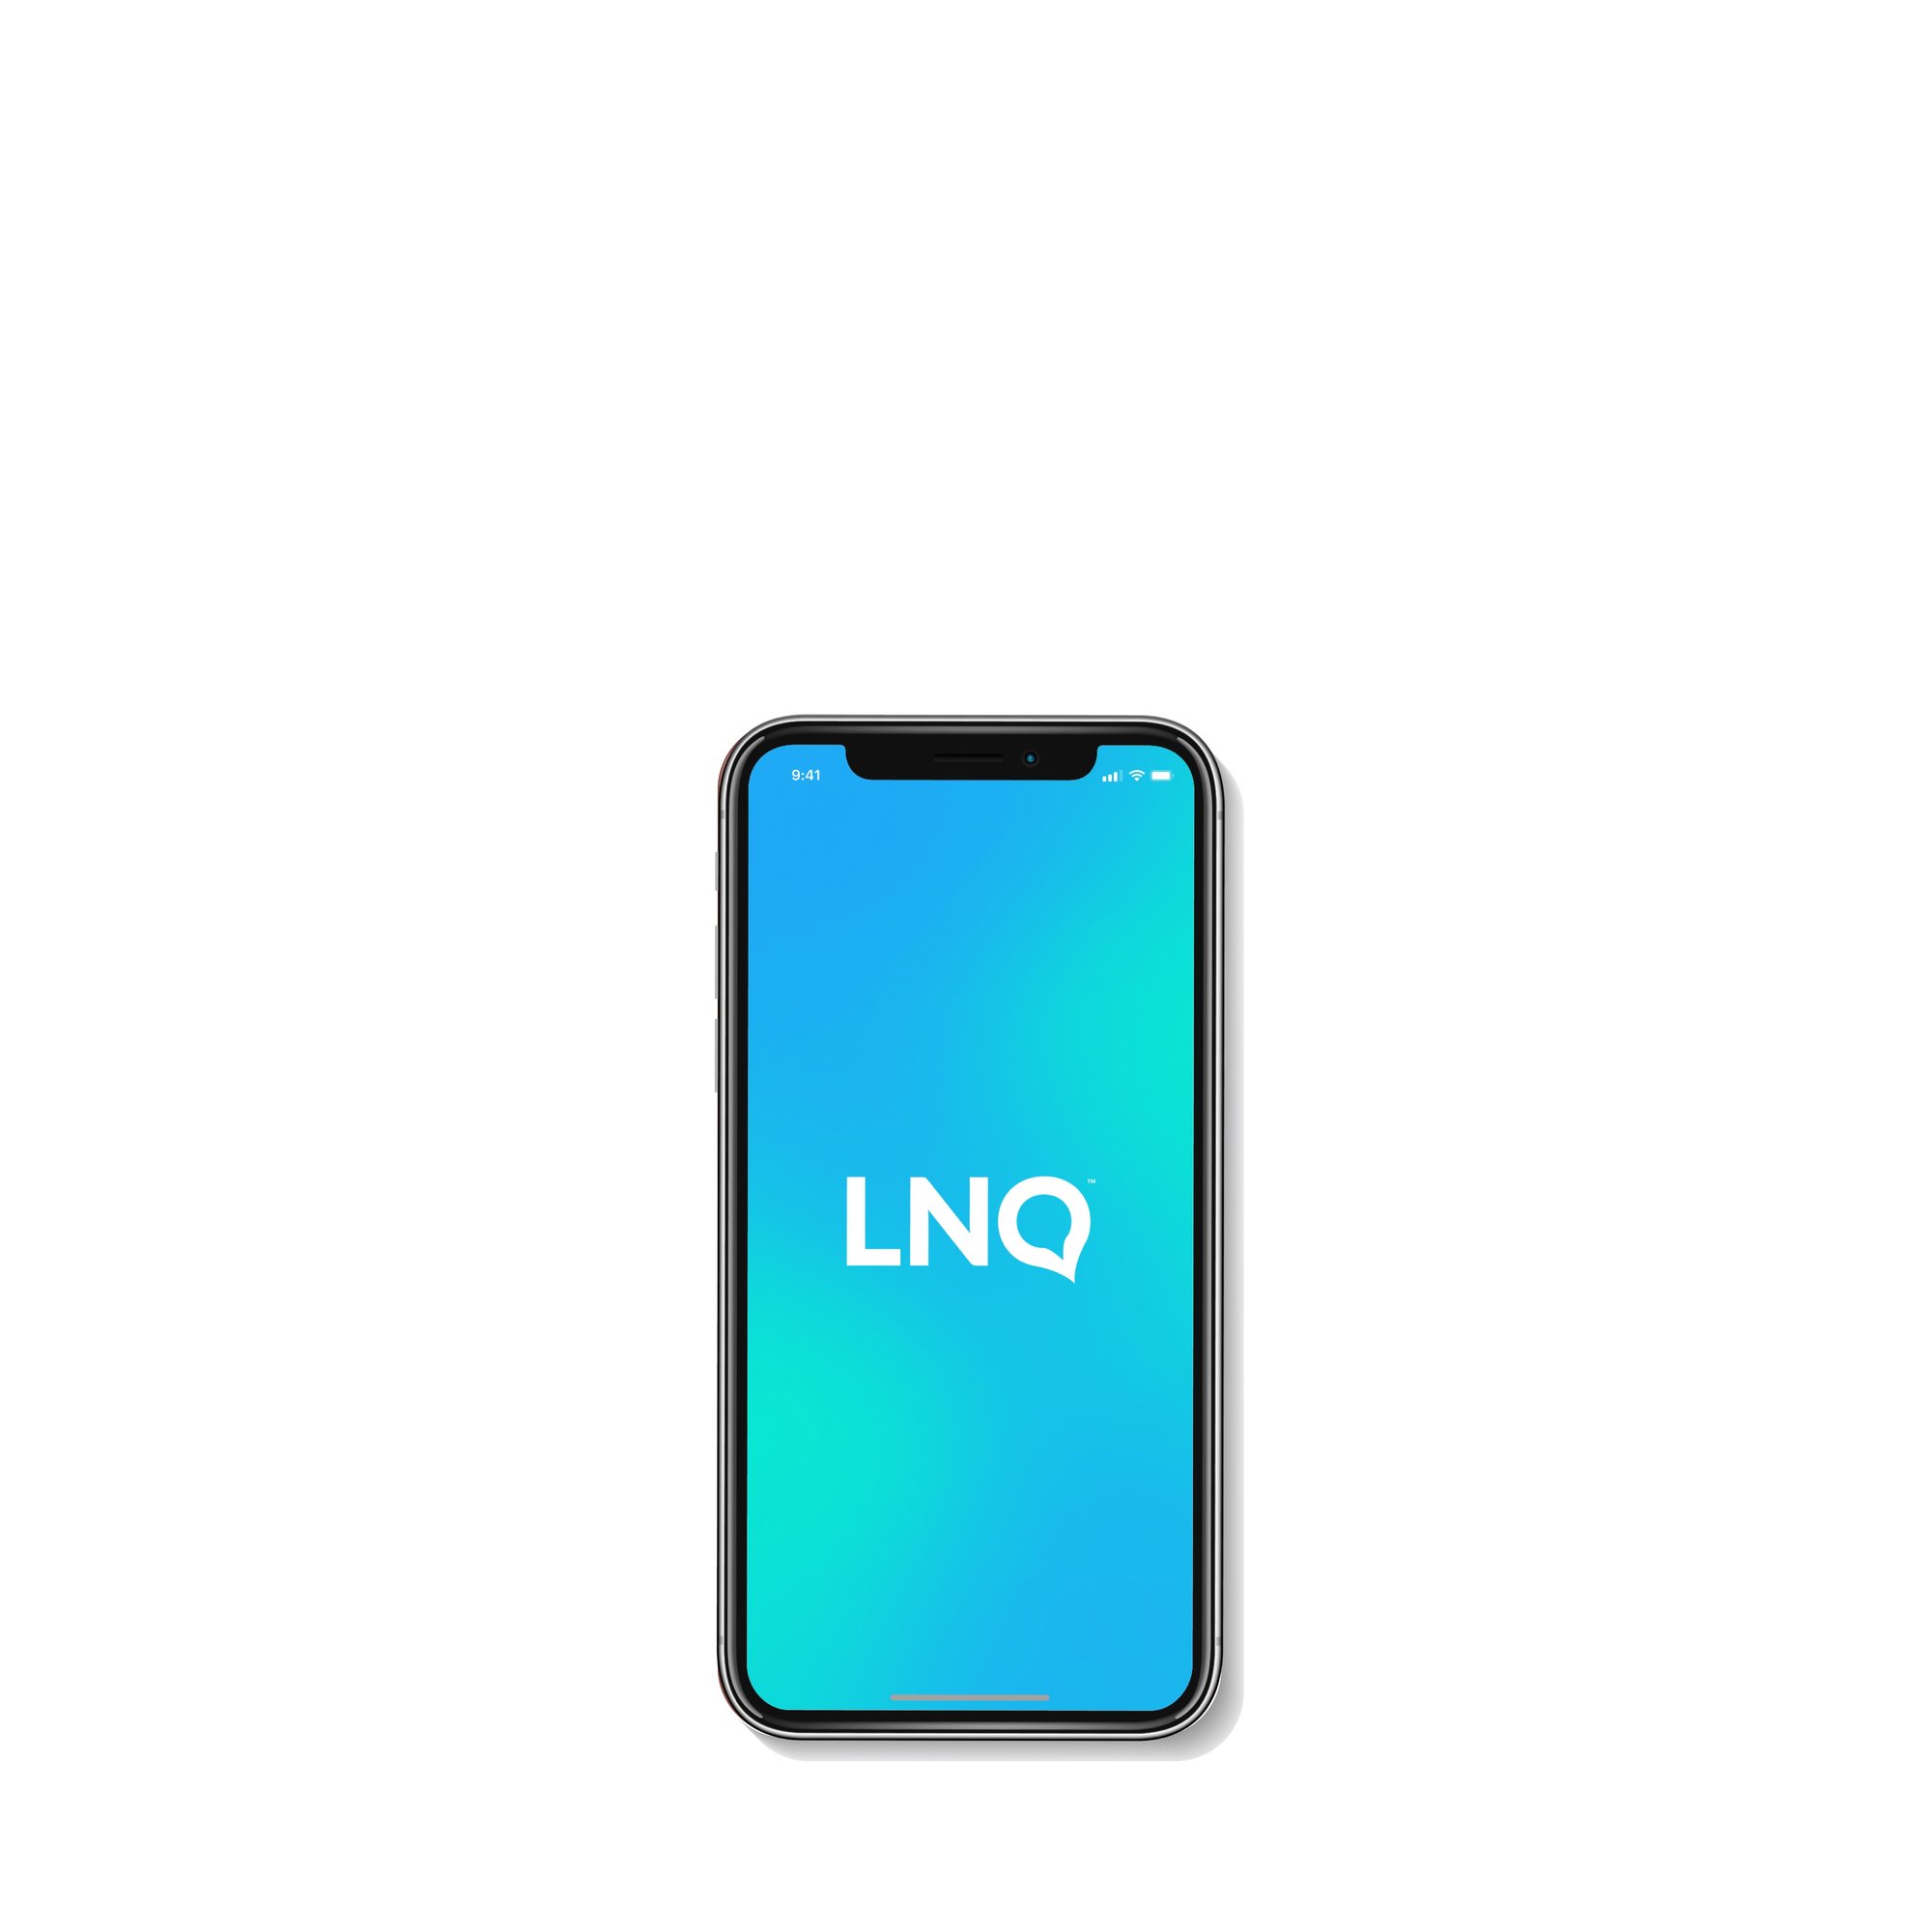 LNQ phone with neutral background